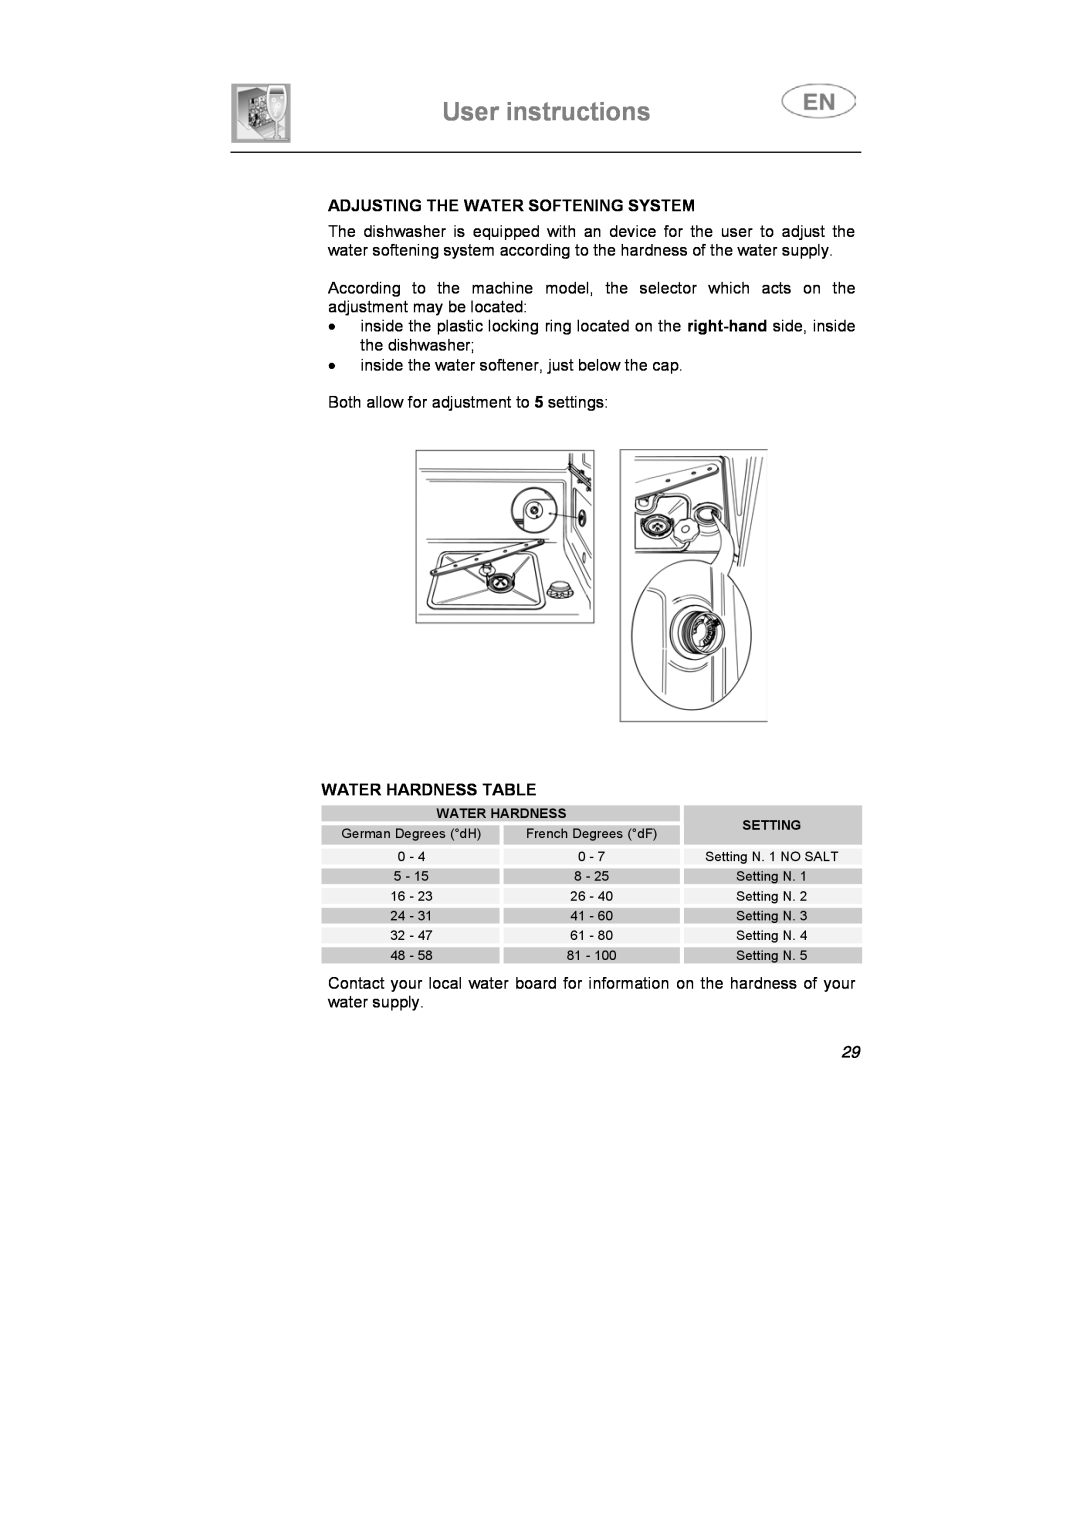 Smeg LSP1453B, LSP1453X1, LSP1453N manual User instructions, Adjusting The Water Softening System, Water Hardness Table 